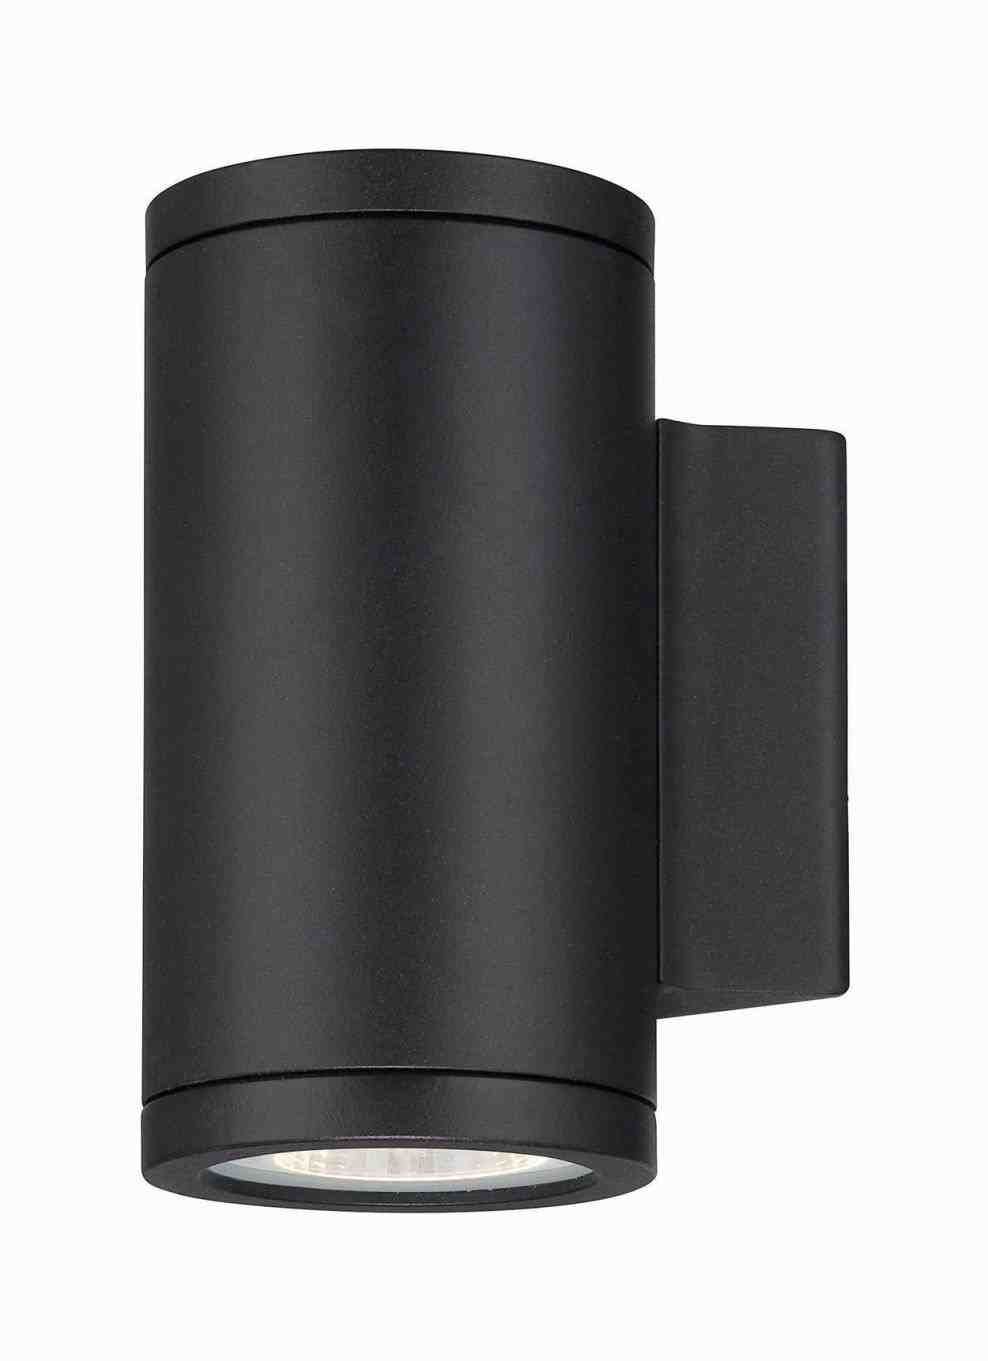 Light Led Outdoor Wall Light Duluthhomeloanrhduluthhomeloancom In Outdoor Wall Sconce Led Lights (Photo 11 of 15)